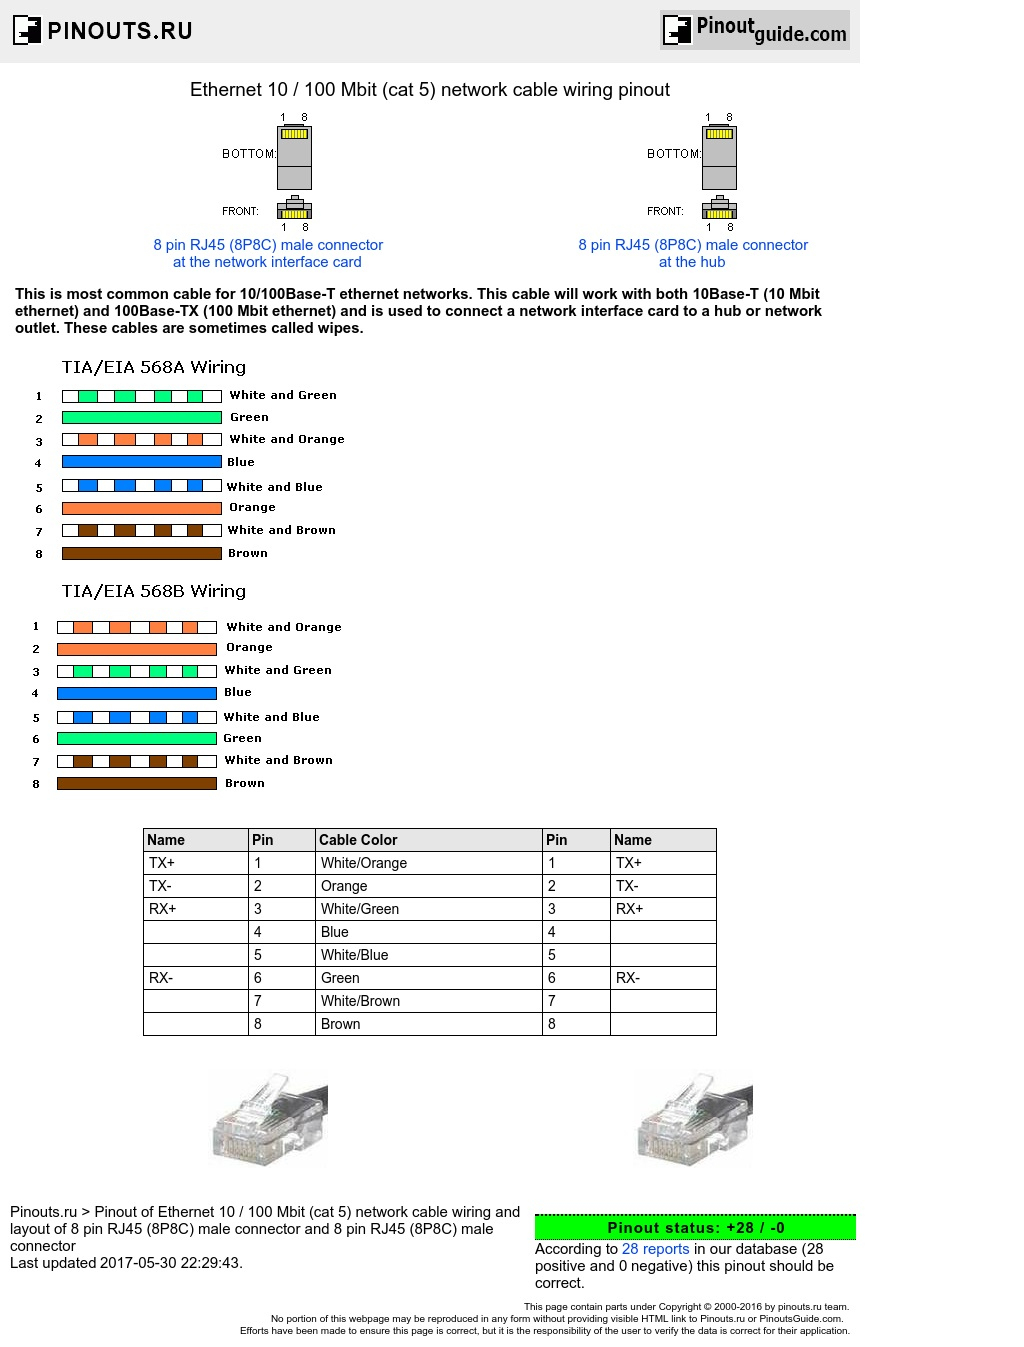 Ethernet 10 / 100 Mbit (Rj45 Cat 5) Network Cable Wiring Pinout - Wiring Diagram For Cat5 Cable